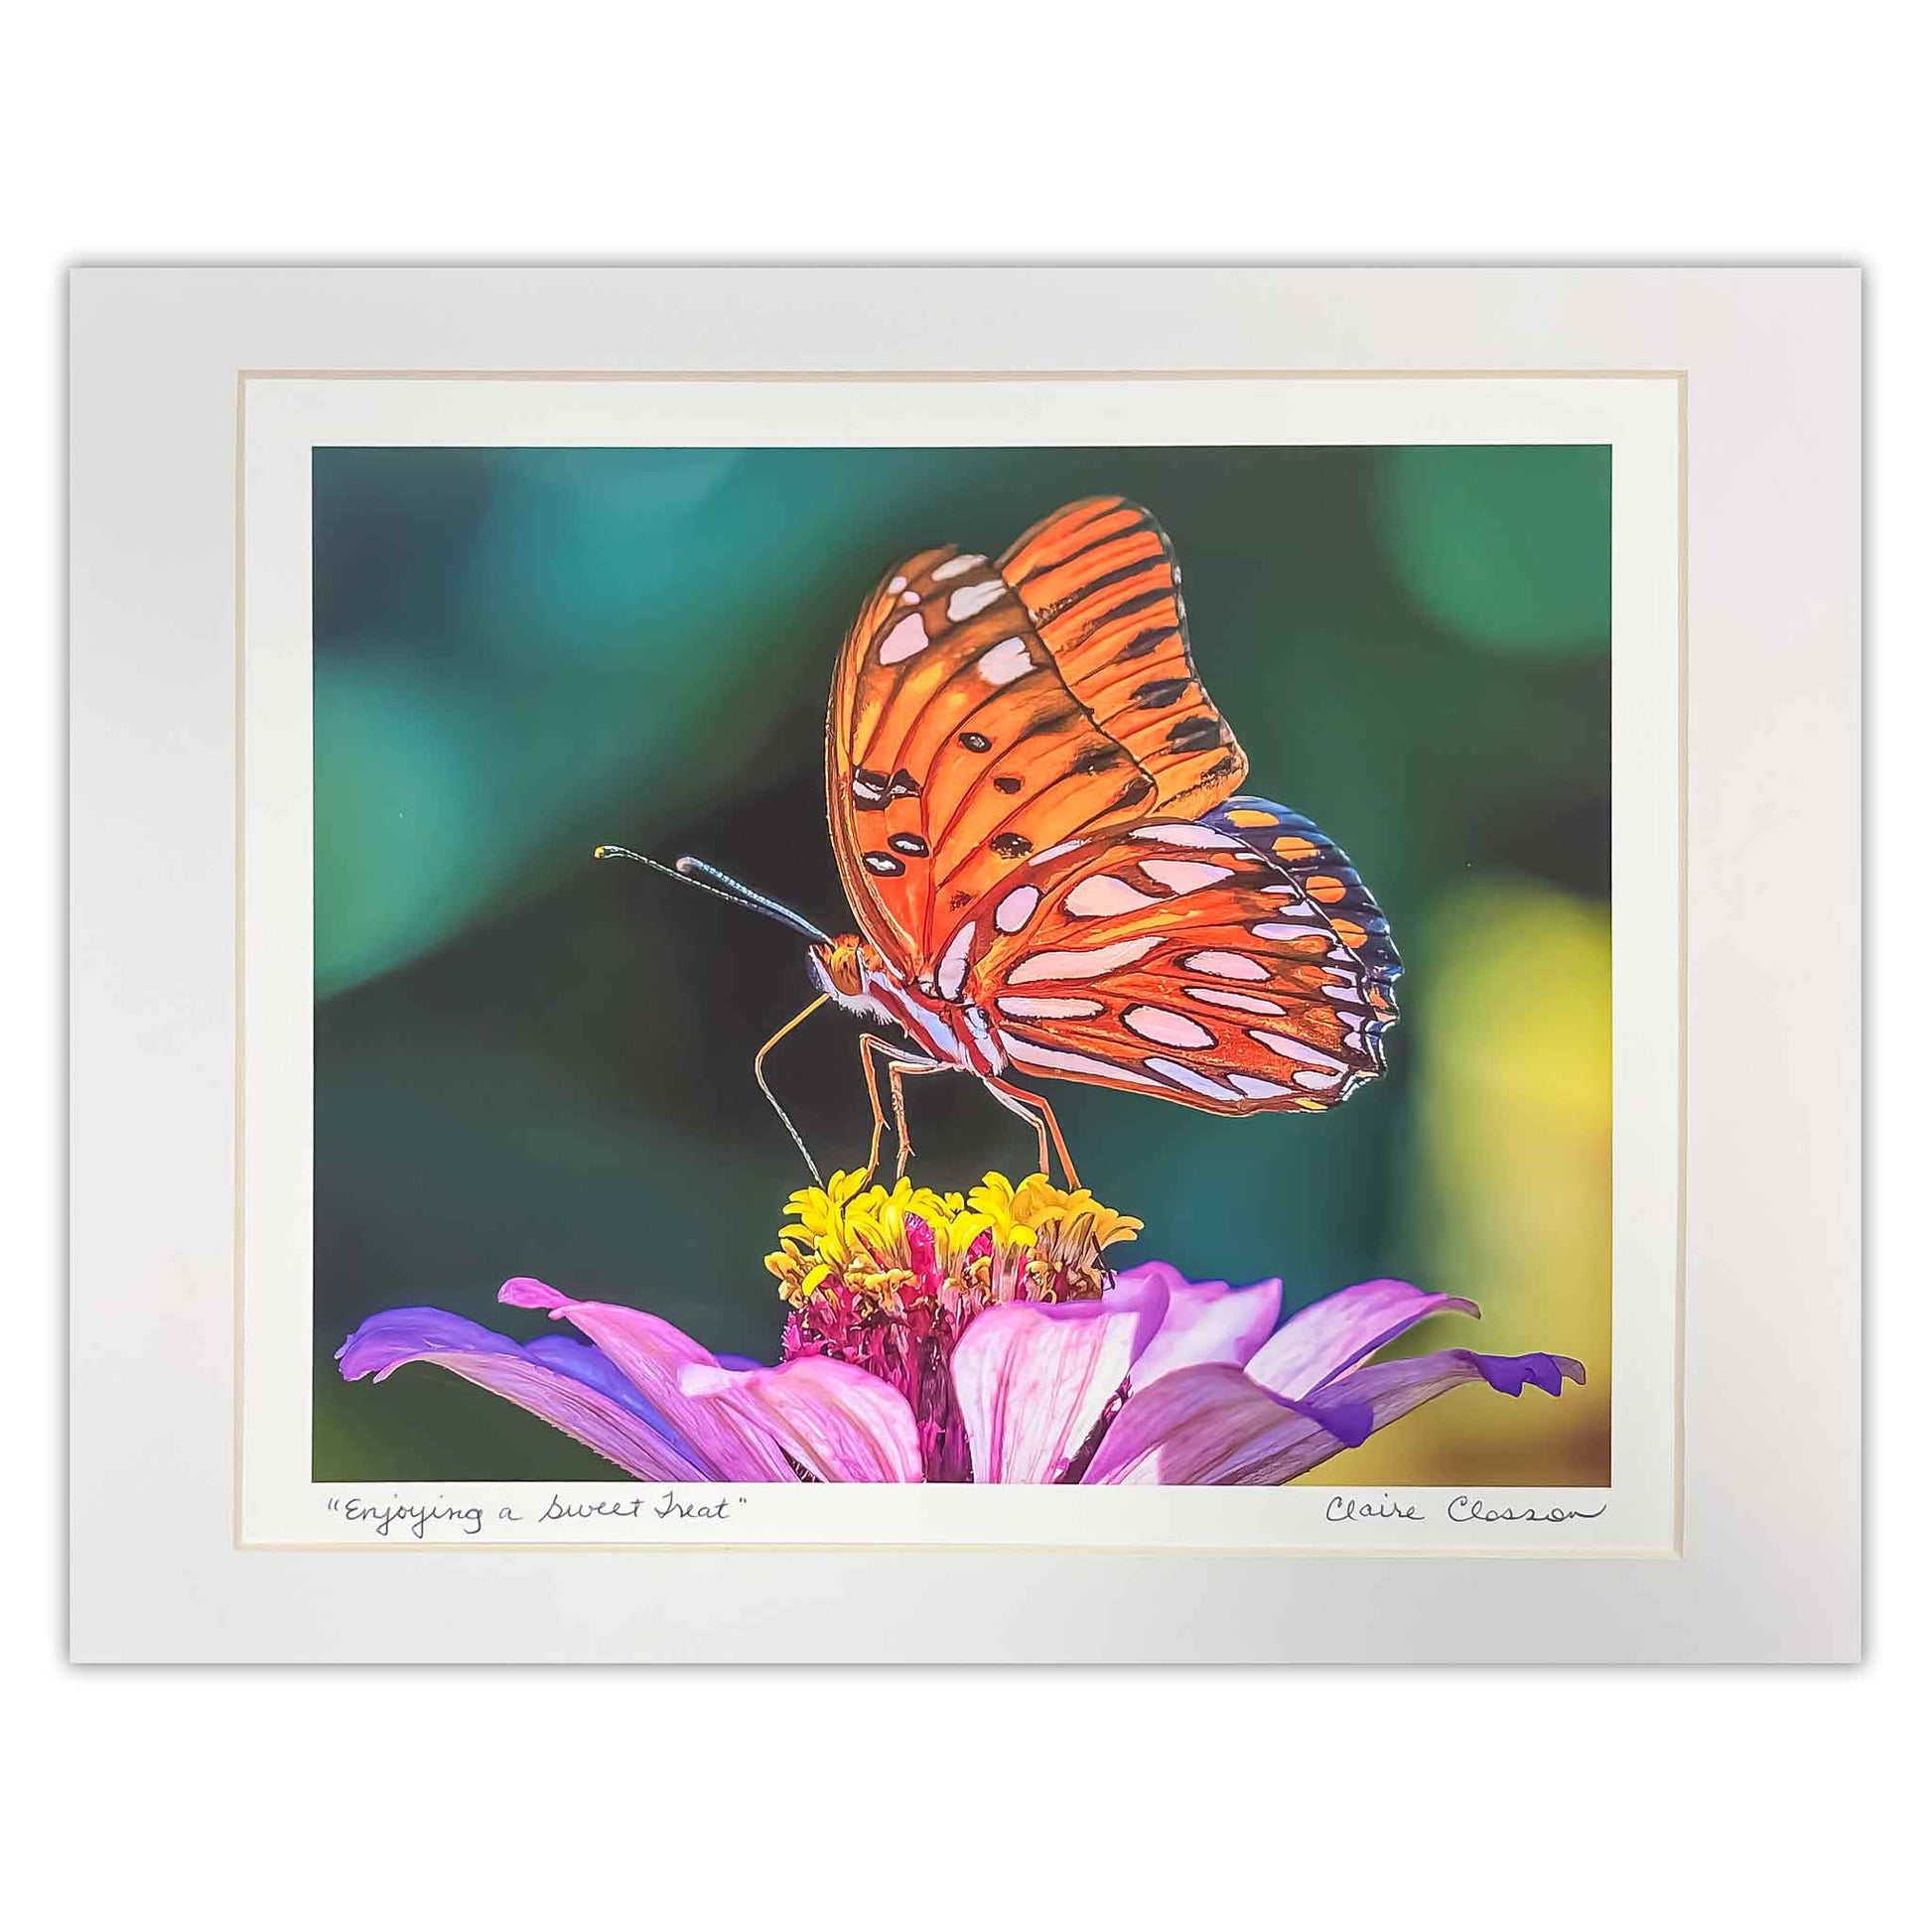 ECC “Enjoying a Sweet Treat” Matted Photographic Print by Photographer Claire Closson. Shows a beautiful Gulf Fritillary Butterfly. Photographed in Leu Gardens. Orange, white and black butterfly on a purple and yellow cosmos. Subtle green background. Ready to be framed. Wildlife phtography. 11X14